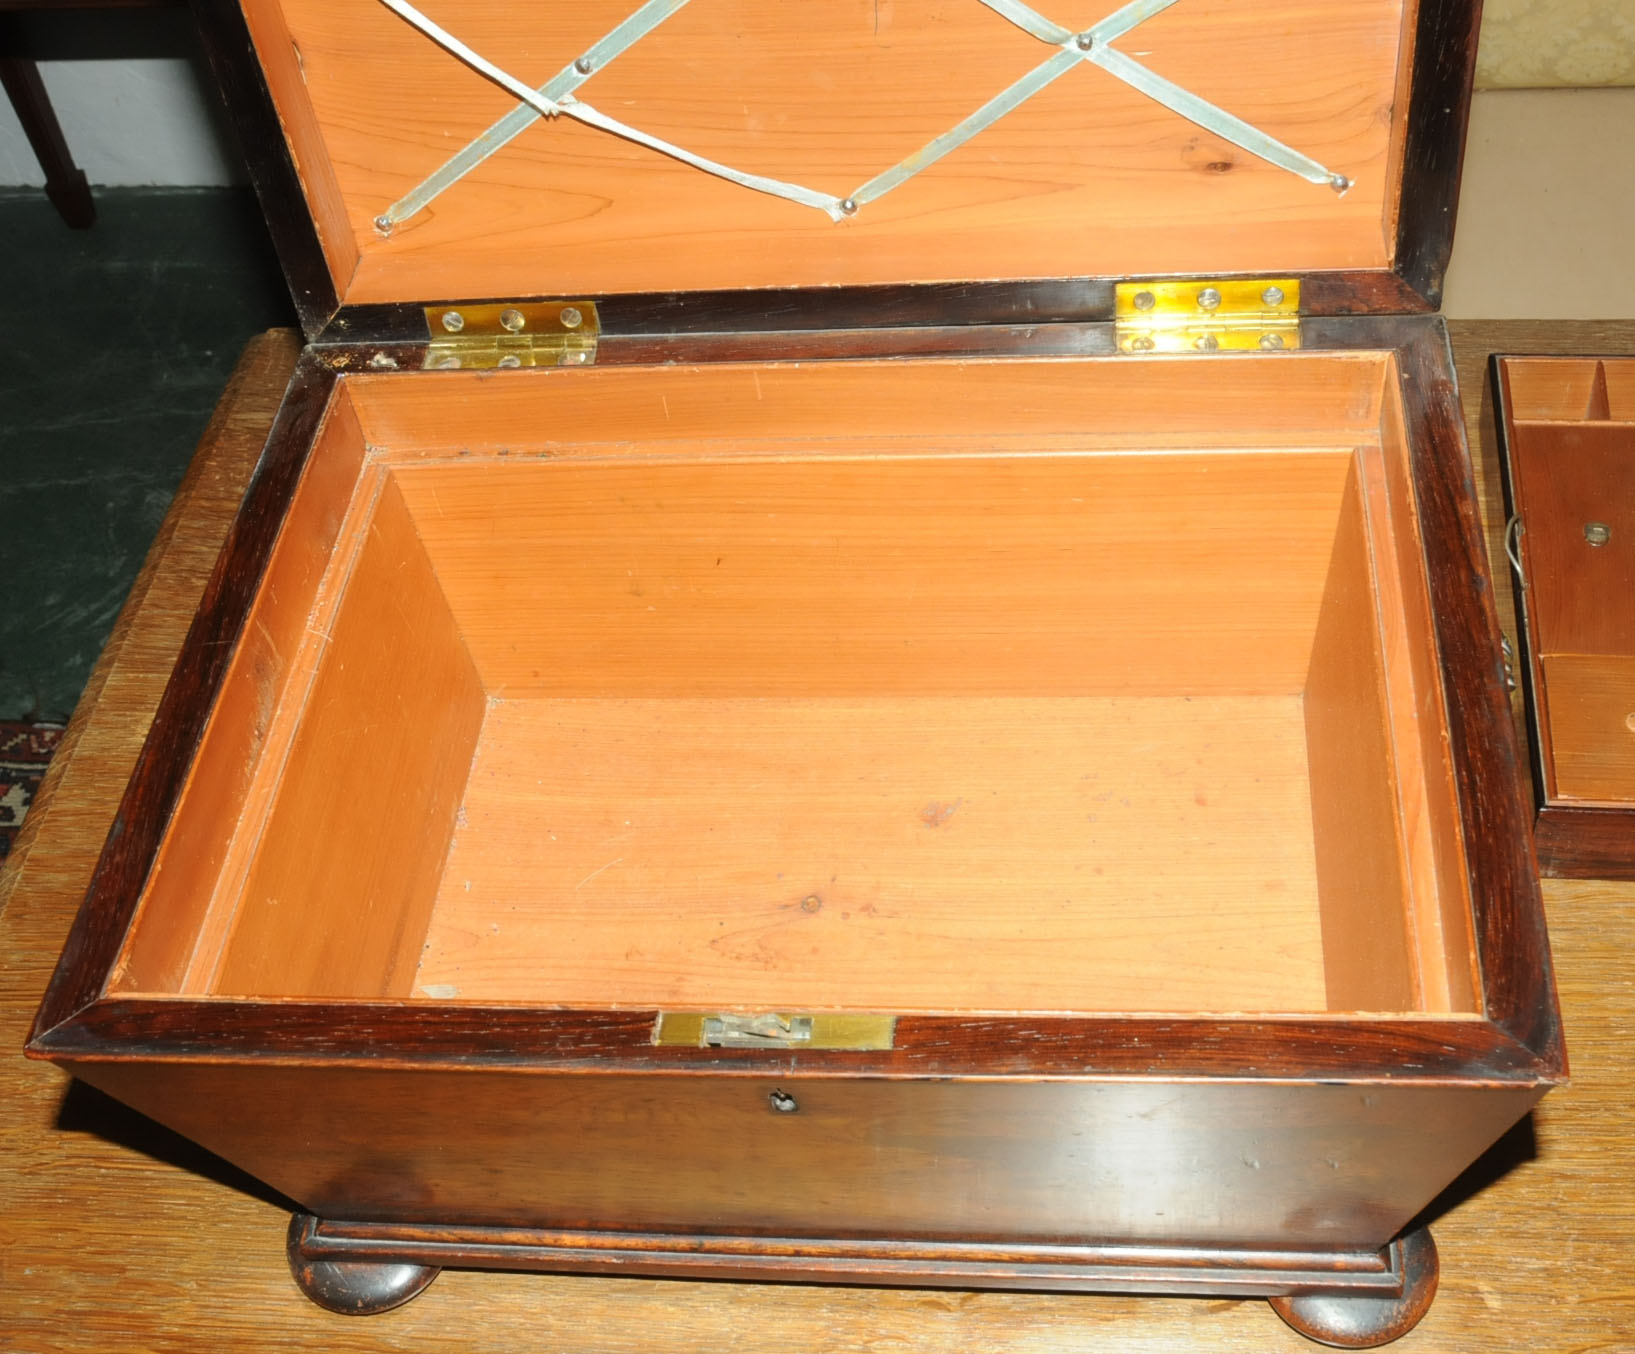 A Regency rosewood table box, with bronze handles, sarcophagus form with interior fitted for sewing. - Image 10 of 10